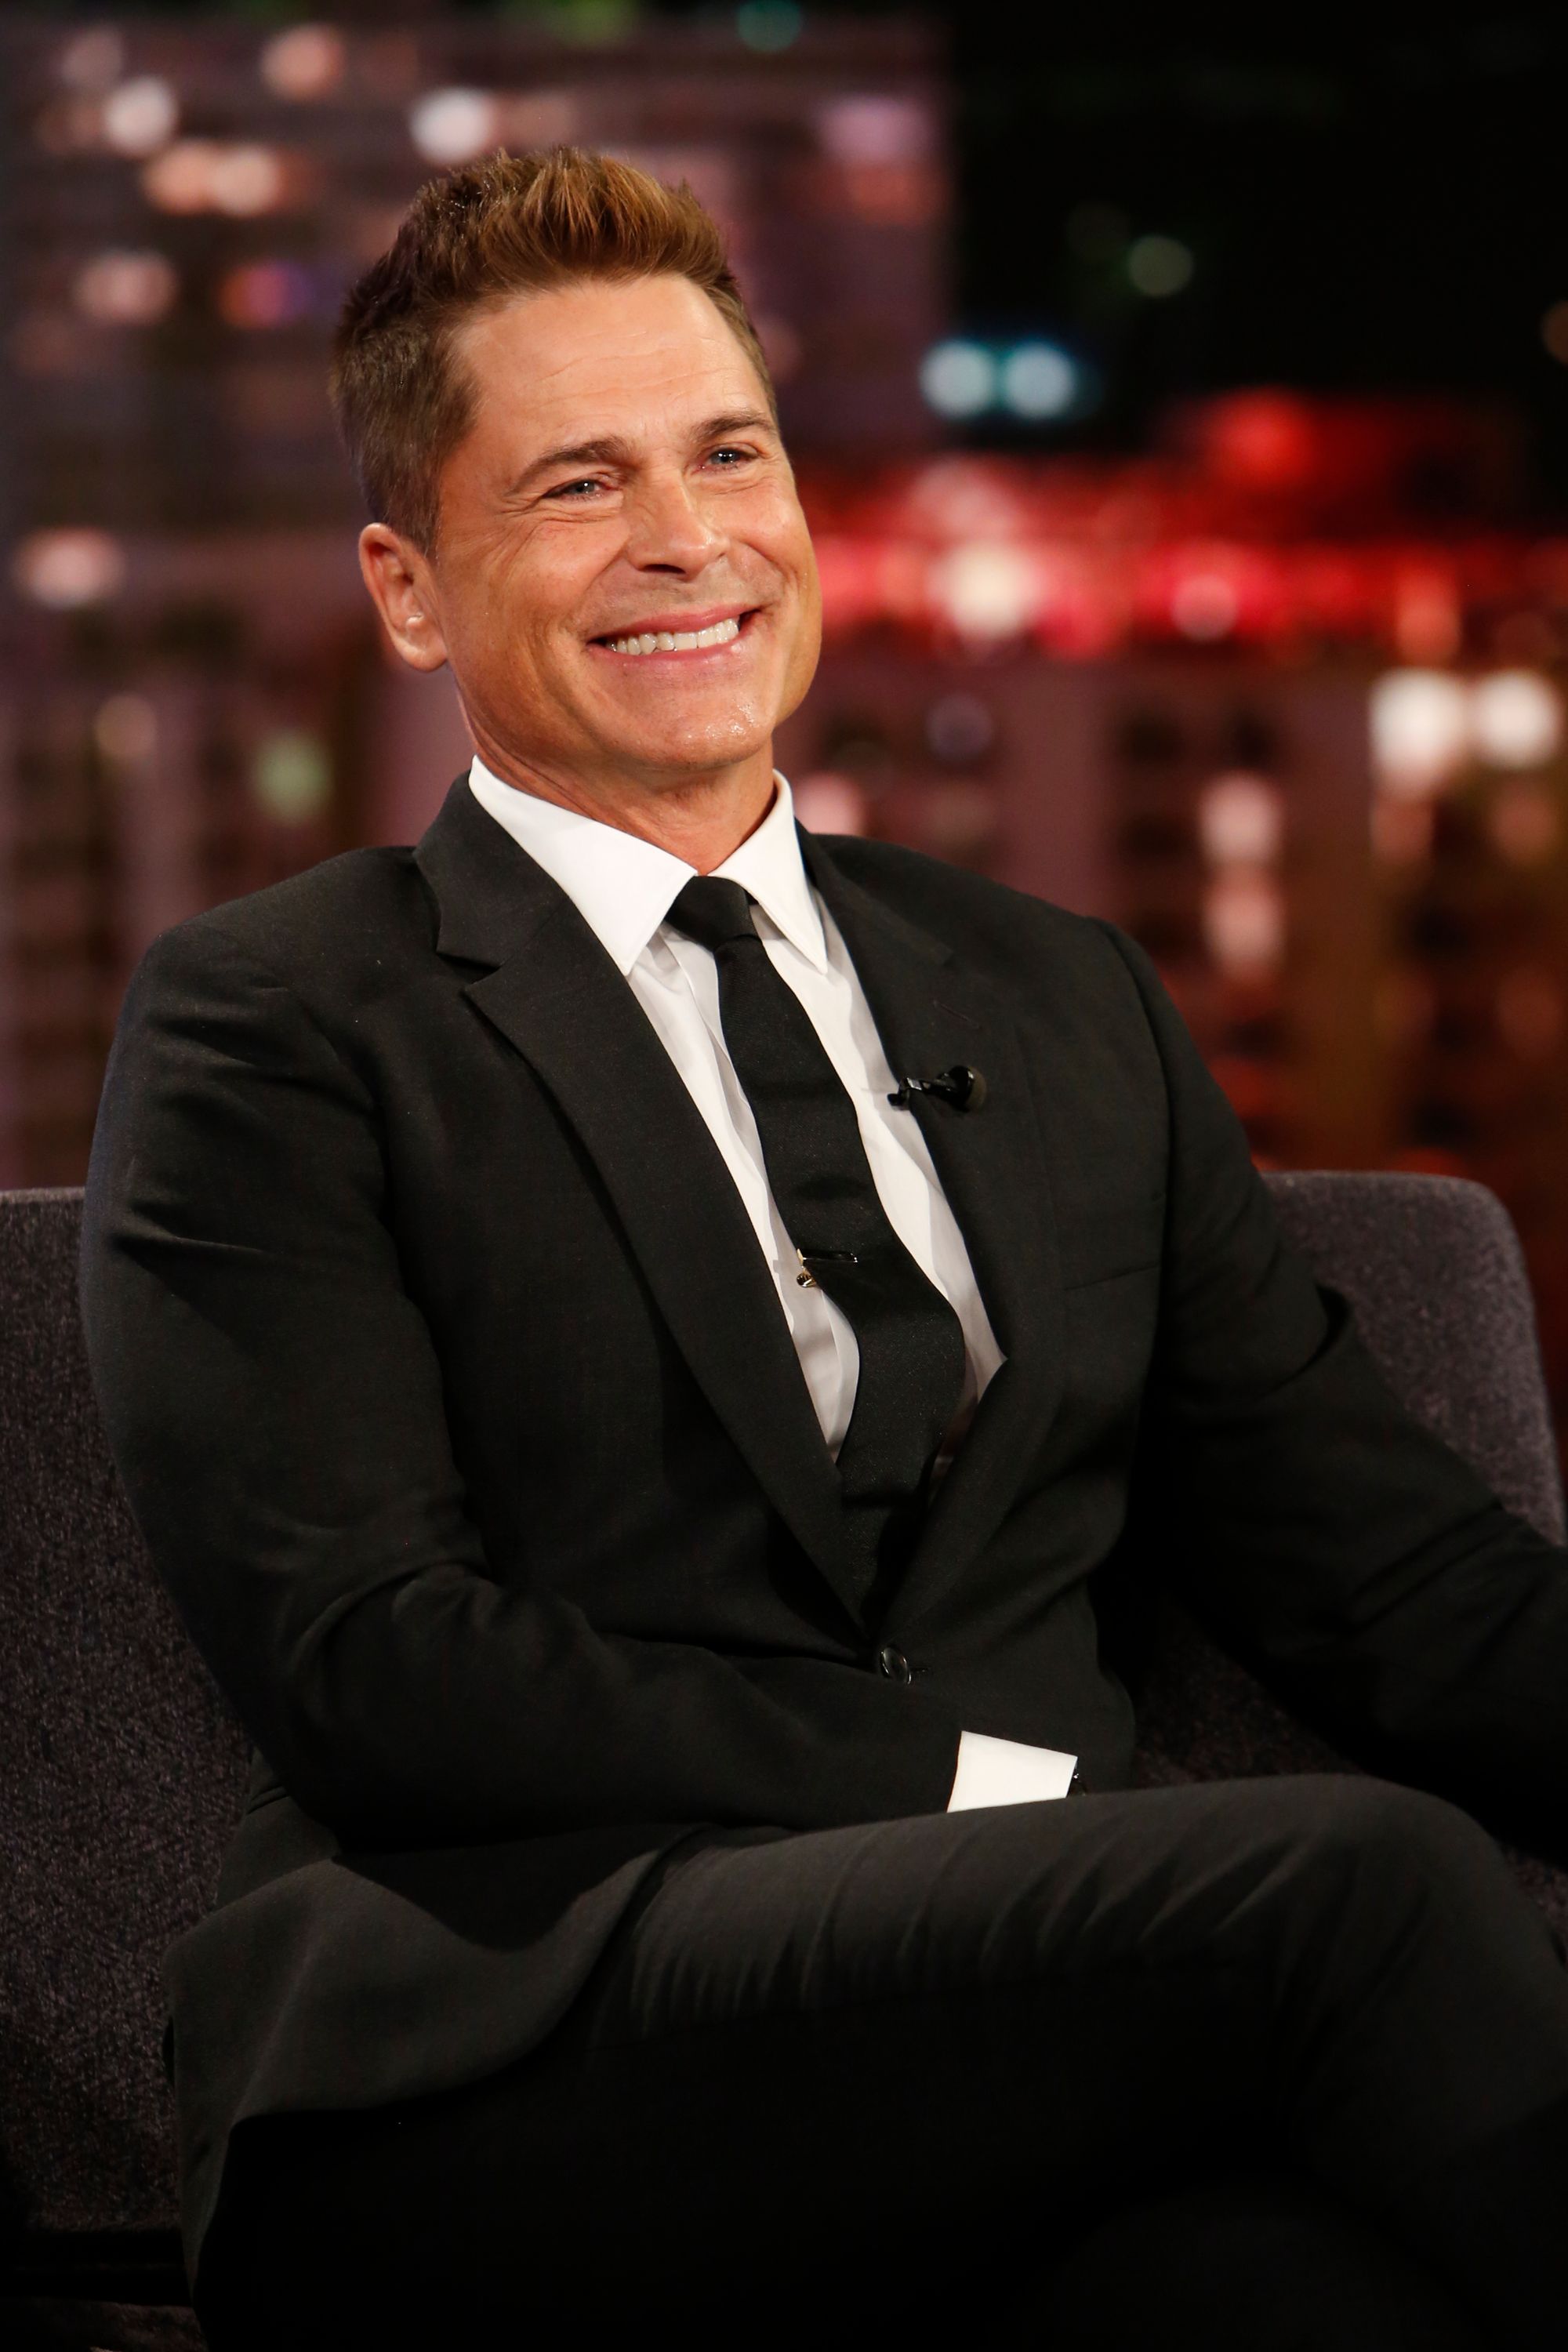 Rob Lowe during ABC's "Jimmy Kimmel Live" - Season 17 | Source: Getty Images